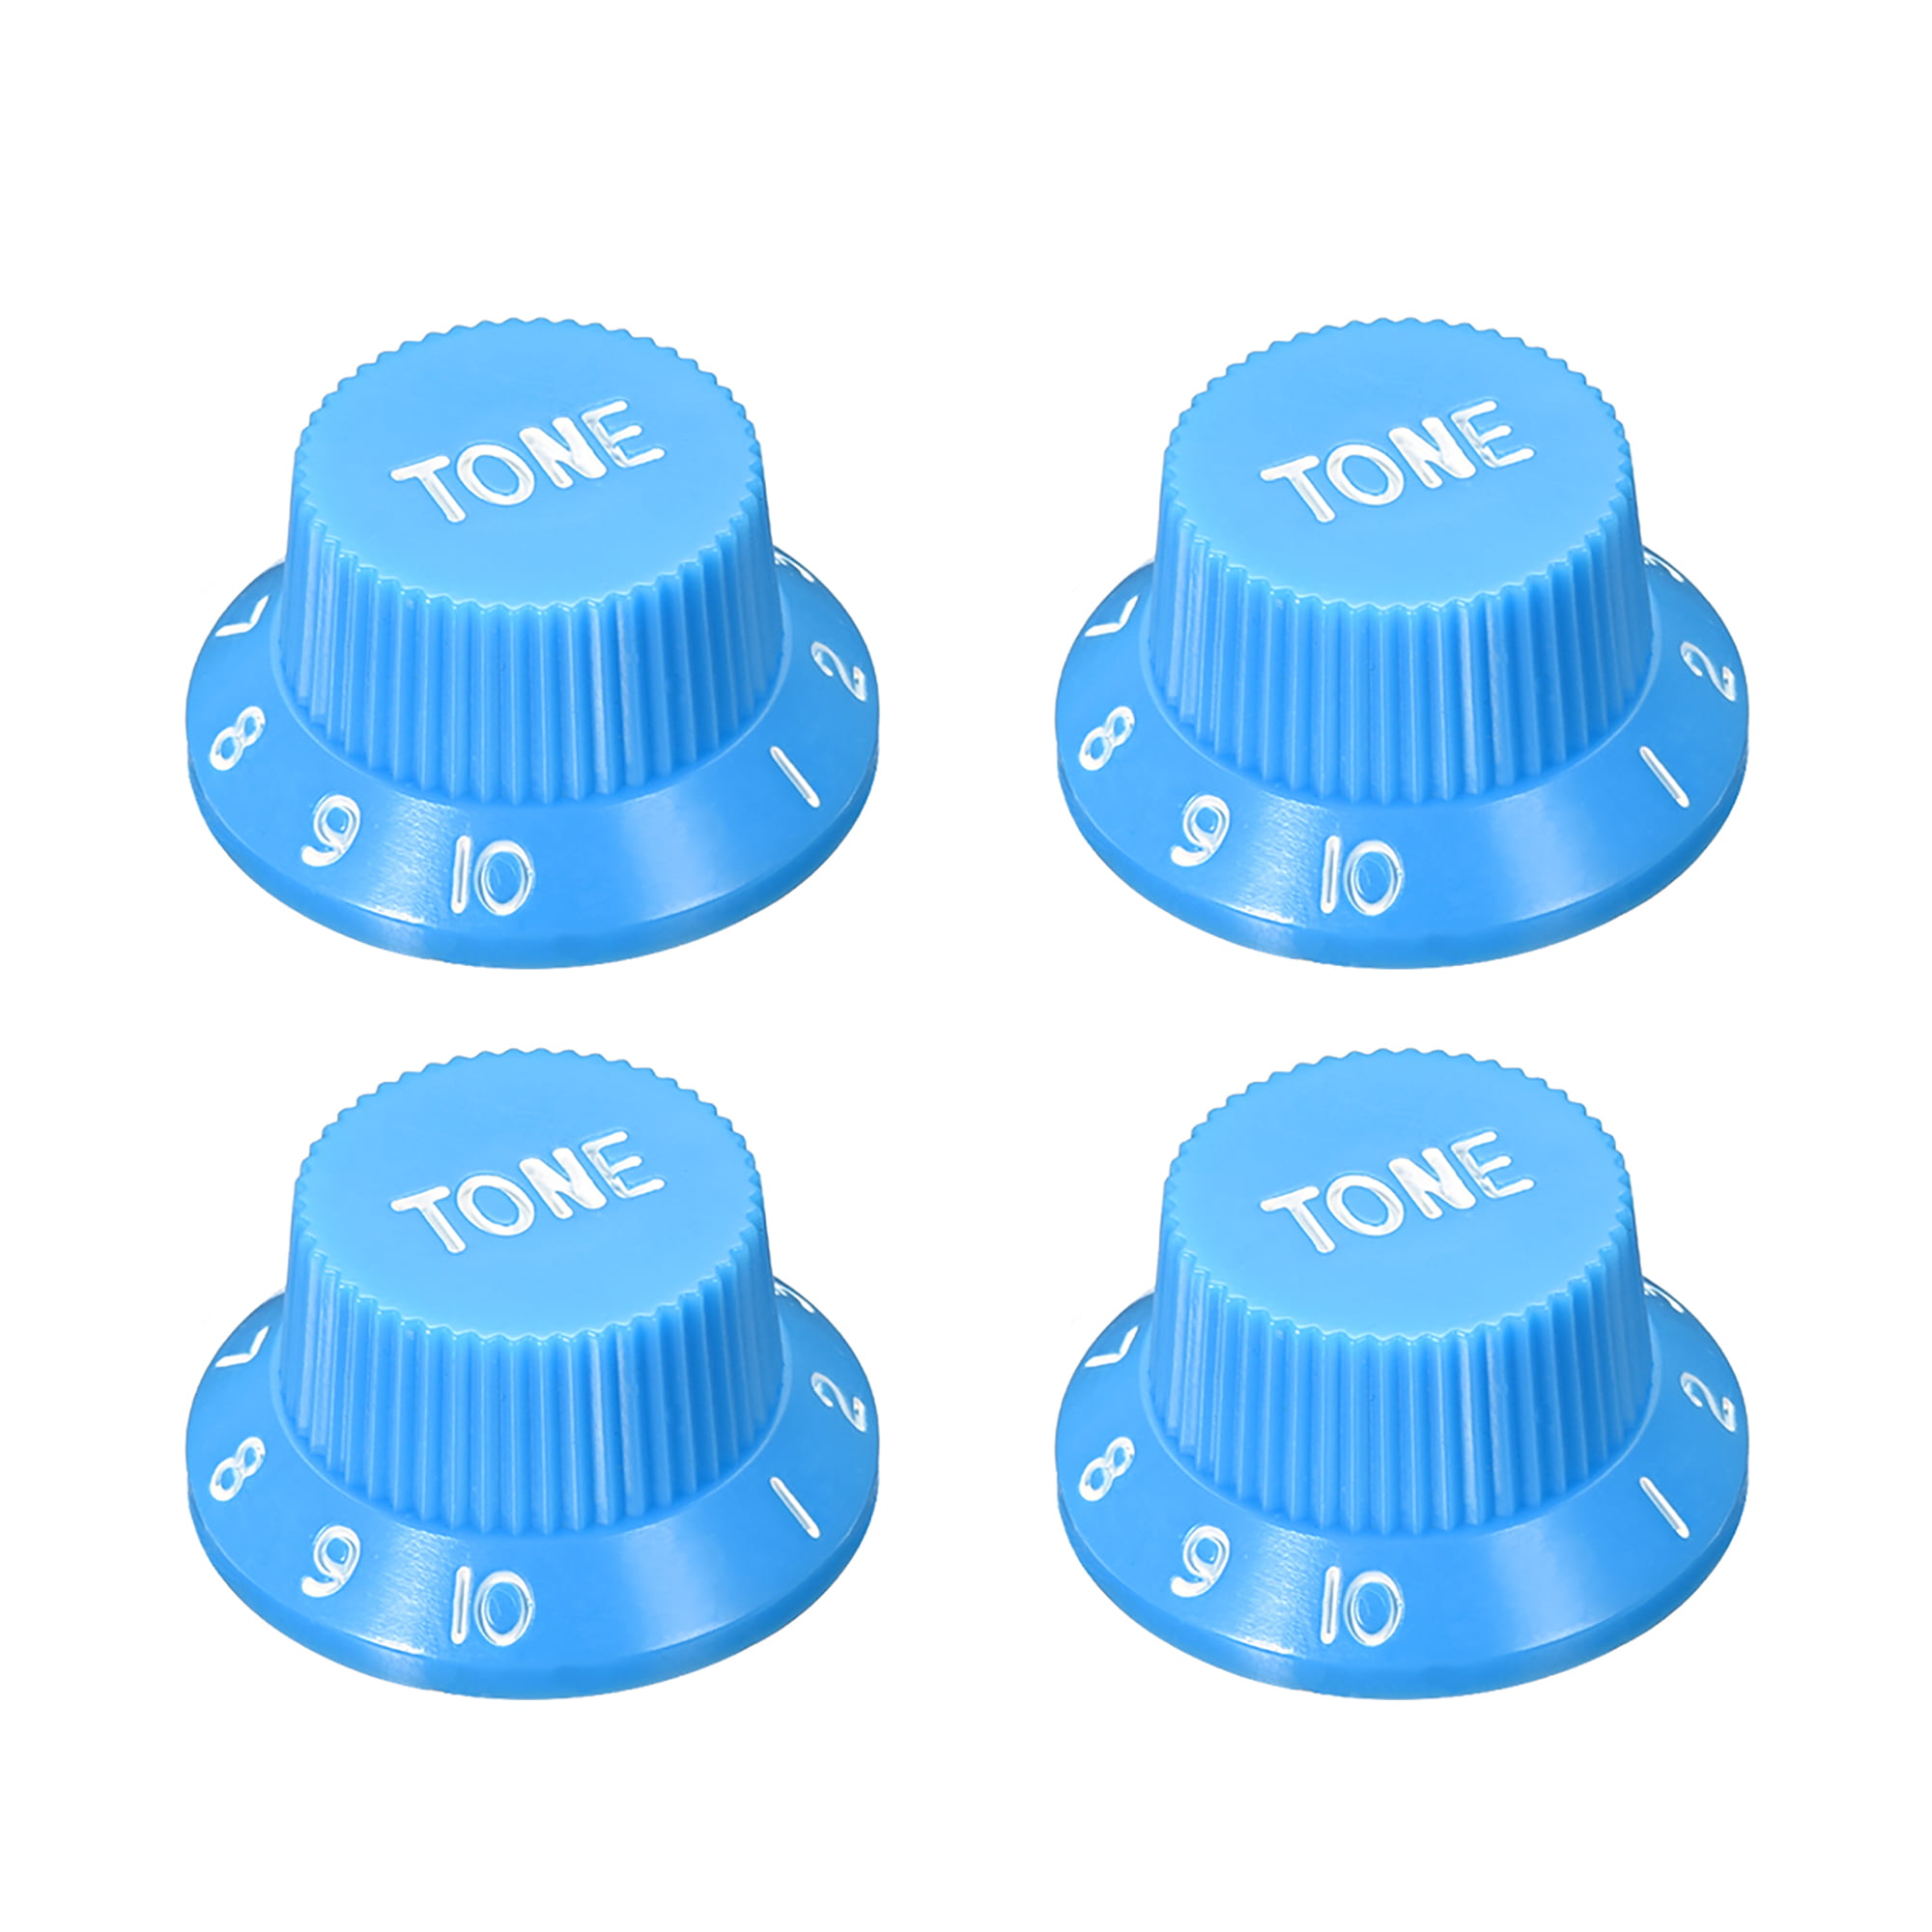 uxcell 10pcs,Potentiometer Control Knobs For Electric Guitar Acrylic Volume Tone Knobs Black D type 6mm